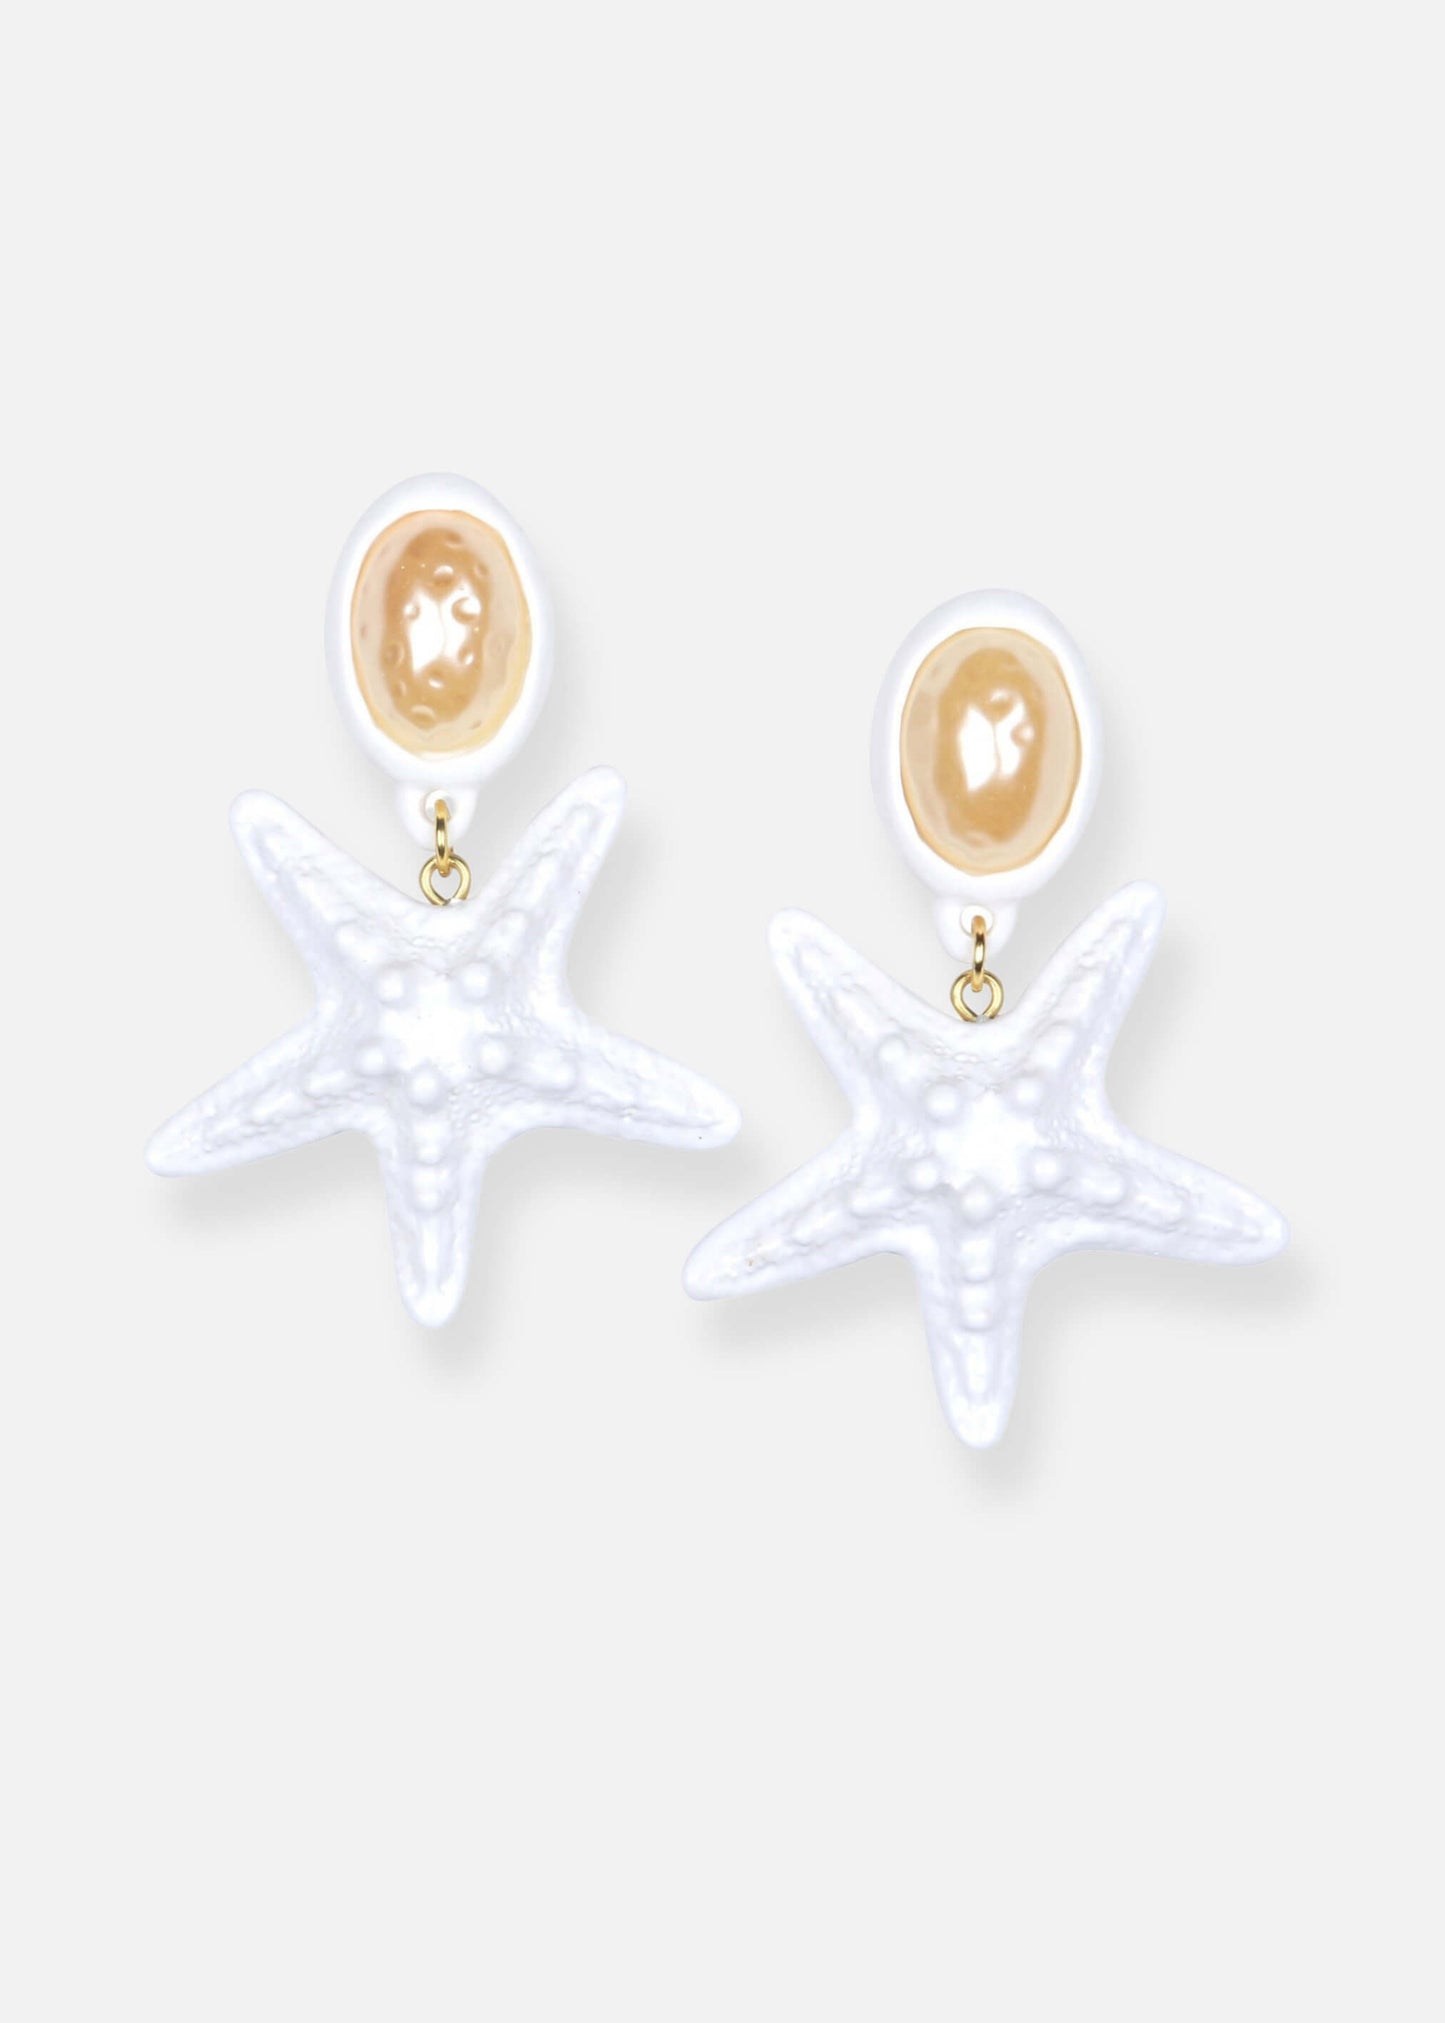 Explore our unique earrings: resin, vintage pearl, enamel paint. Handmade in NYC for sustainable elegance!